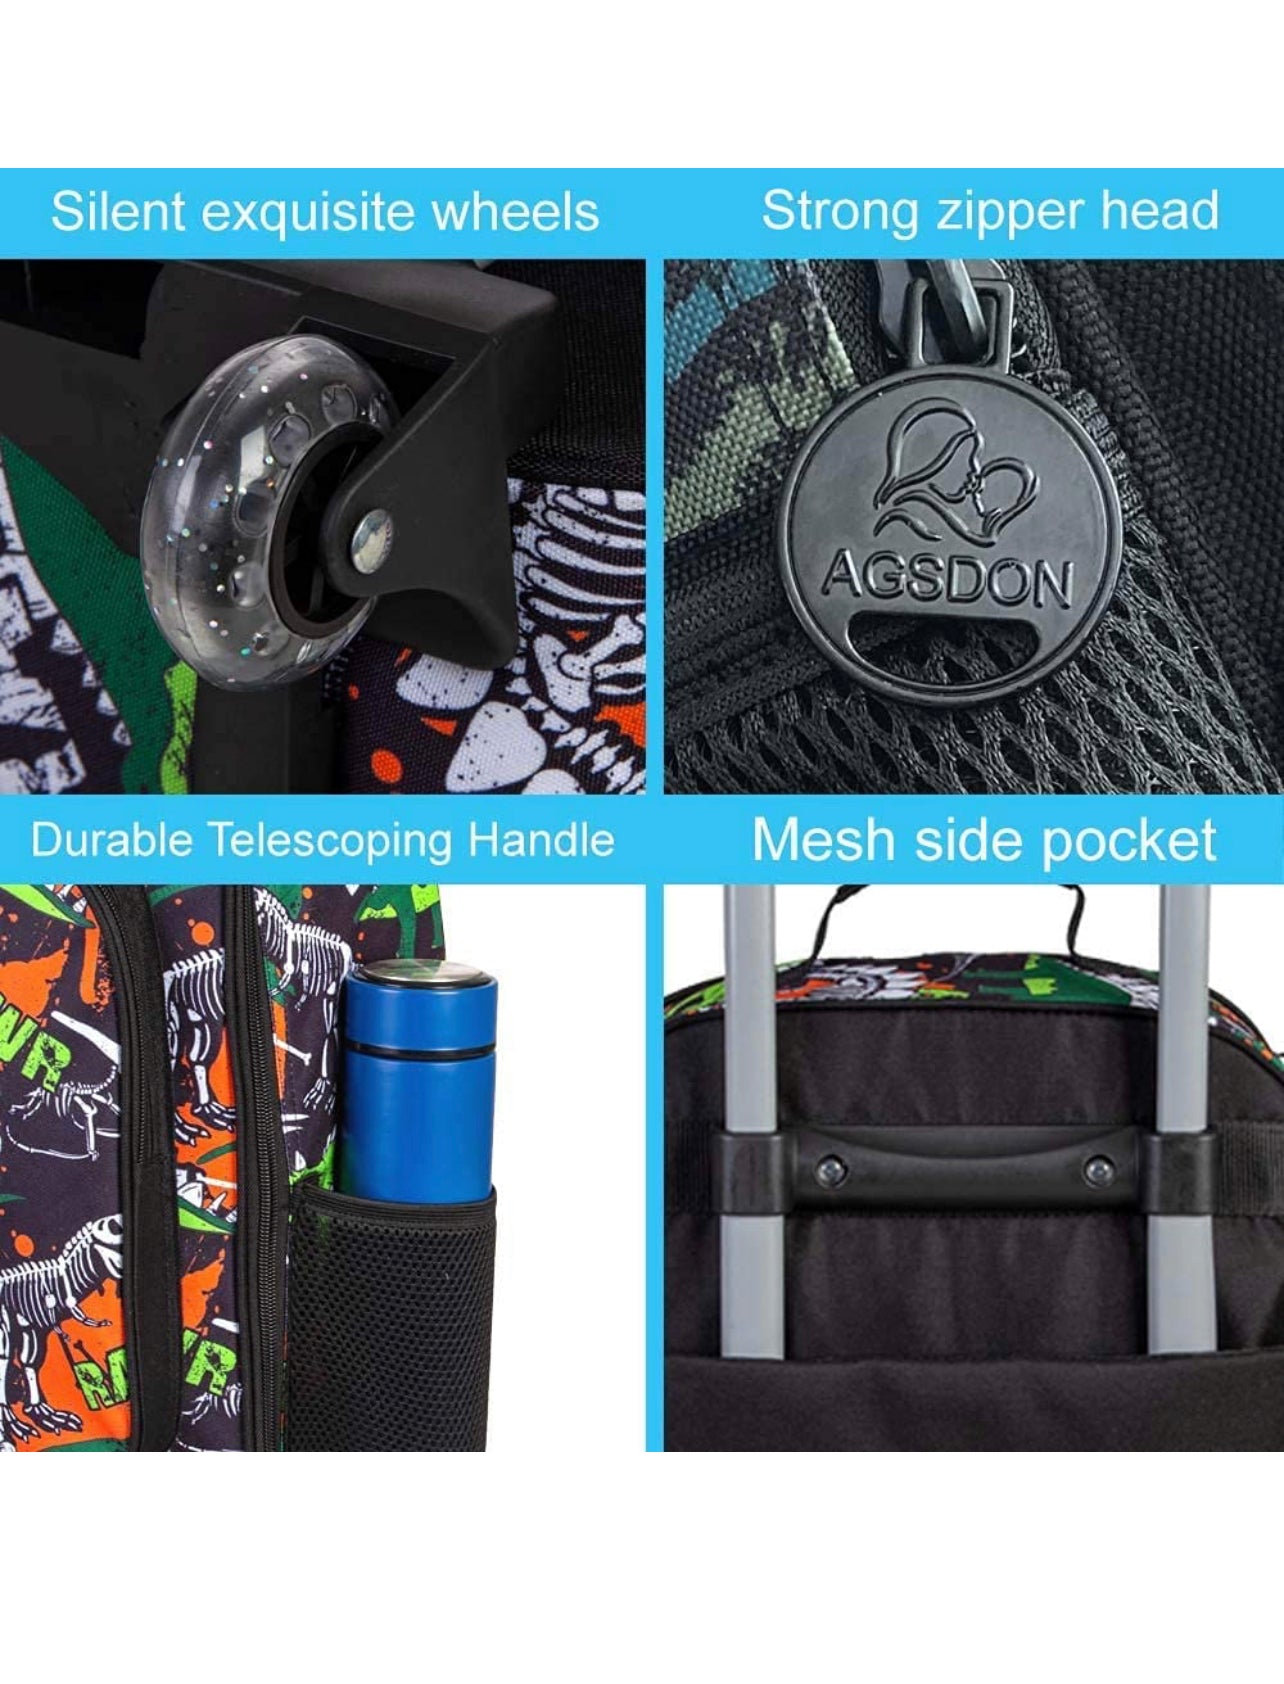 Kids Luggage for Boys, Cute Dinosaur Rolling Wheels Suitcase for Toddler Children - MyTravelShop.ca